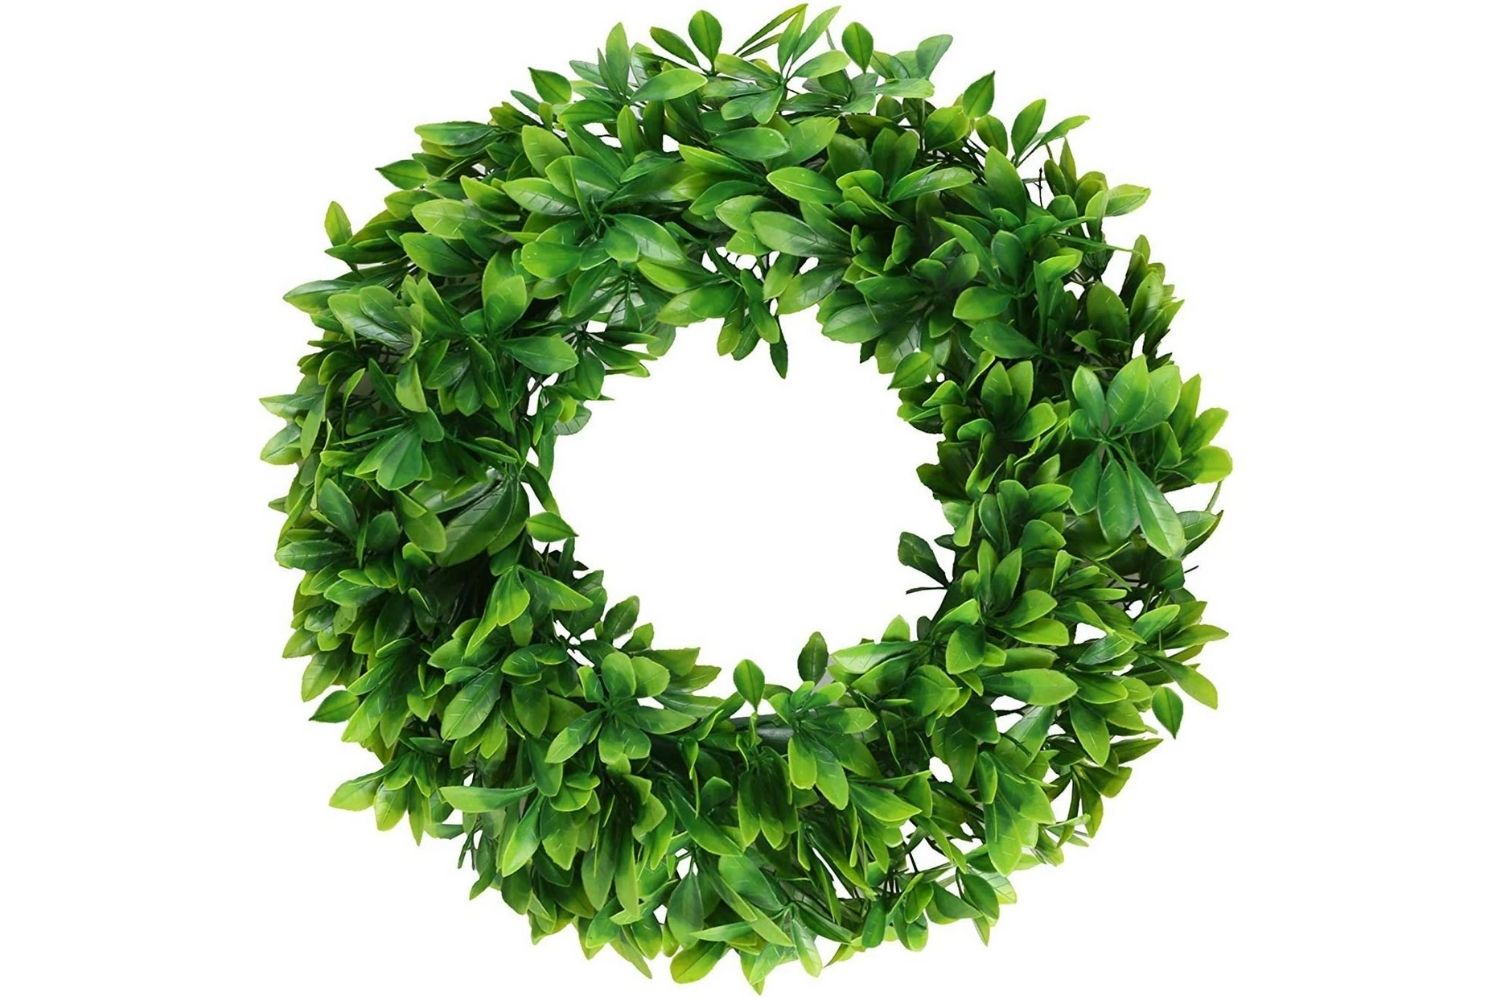 The Best Christmas Wreaths Option: Pauwer Artificial Green Leaves 16" Boxwood Wreath